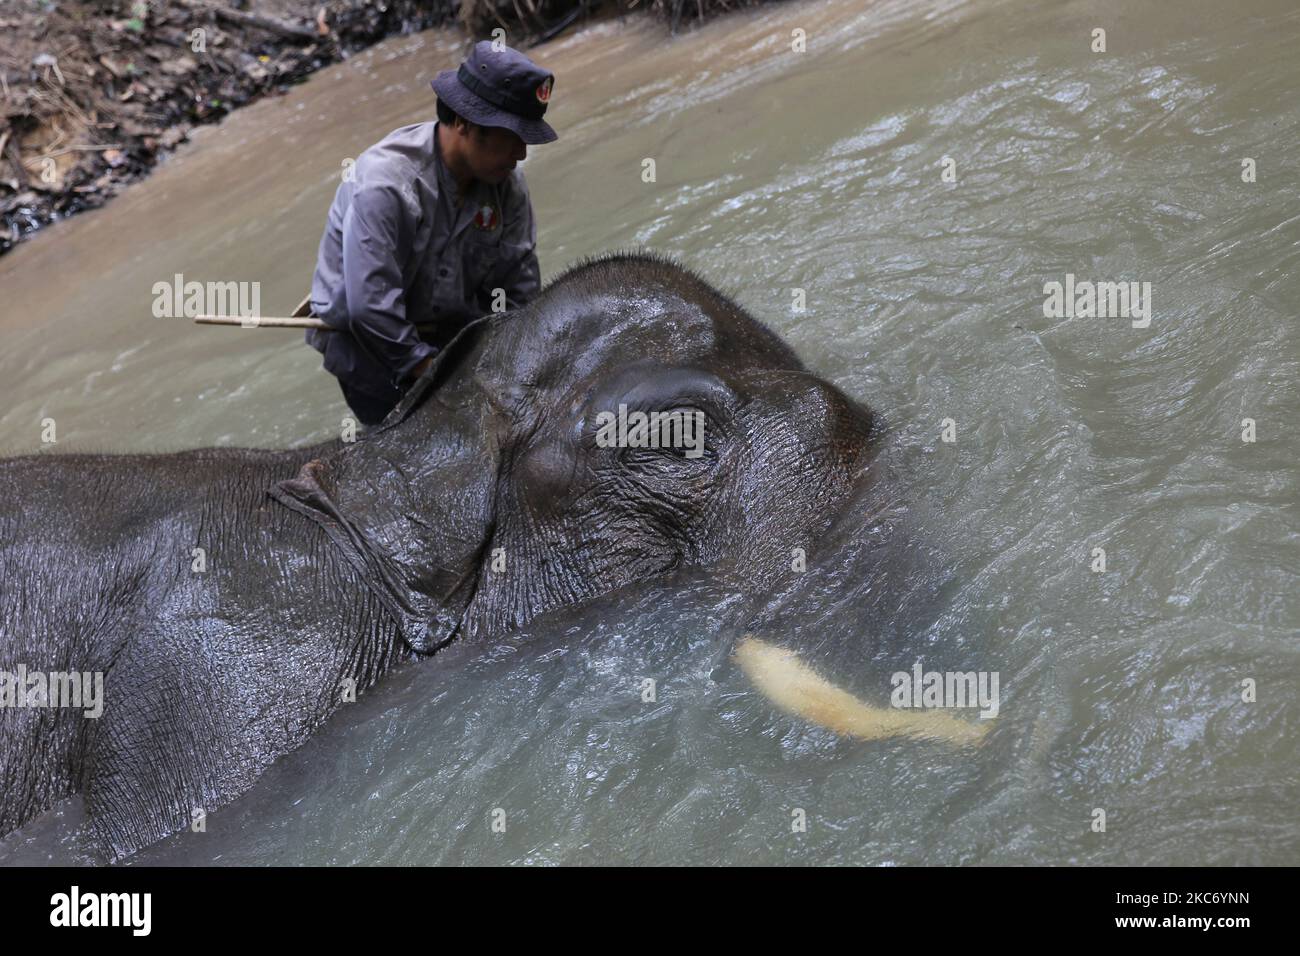 Mahout from the Elephant Response Unit (ERU) bathes the elephants sumatran and gives them vitamins before patrol the Way Kambas National Park (TNWK), Tegal Yoso camp in East Lampung Regency, Lampung, Indosia, on January 4, 2021. The elephants in the Elephant Response Unit (ERU) who have been tame and have been trained to assist humans in reconciling human conflicts with wild elephants that enter residential areas and fields to be escorted into the forest in the National Park area. (Photo by Dasril Roszandi/NurPhoto) Stock Photo